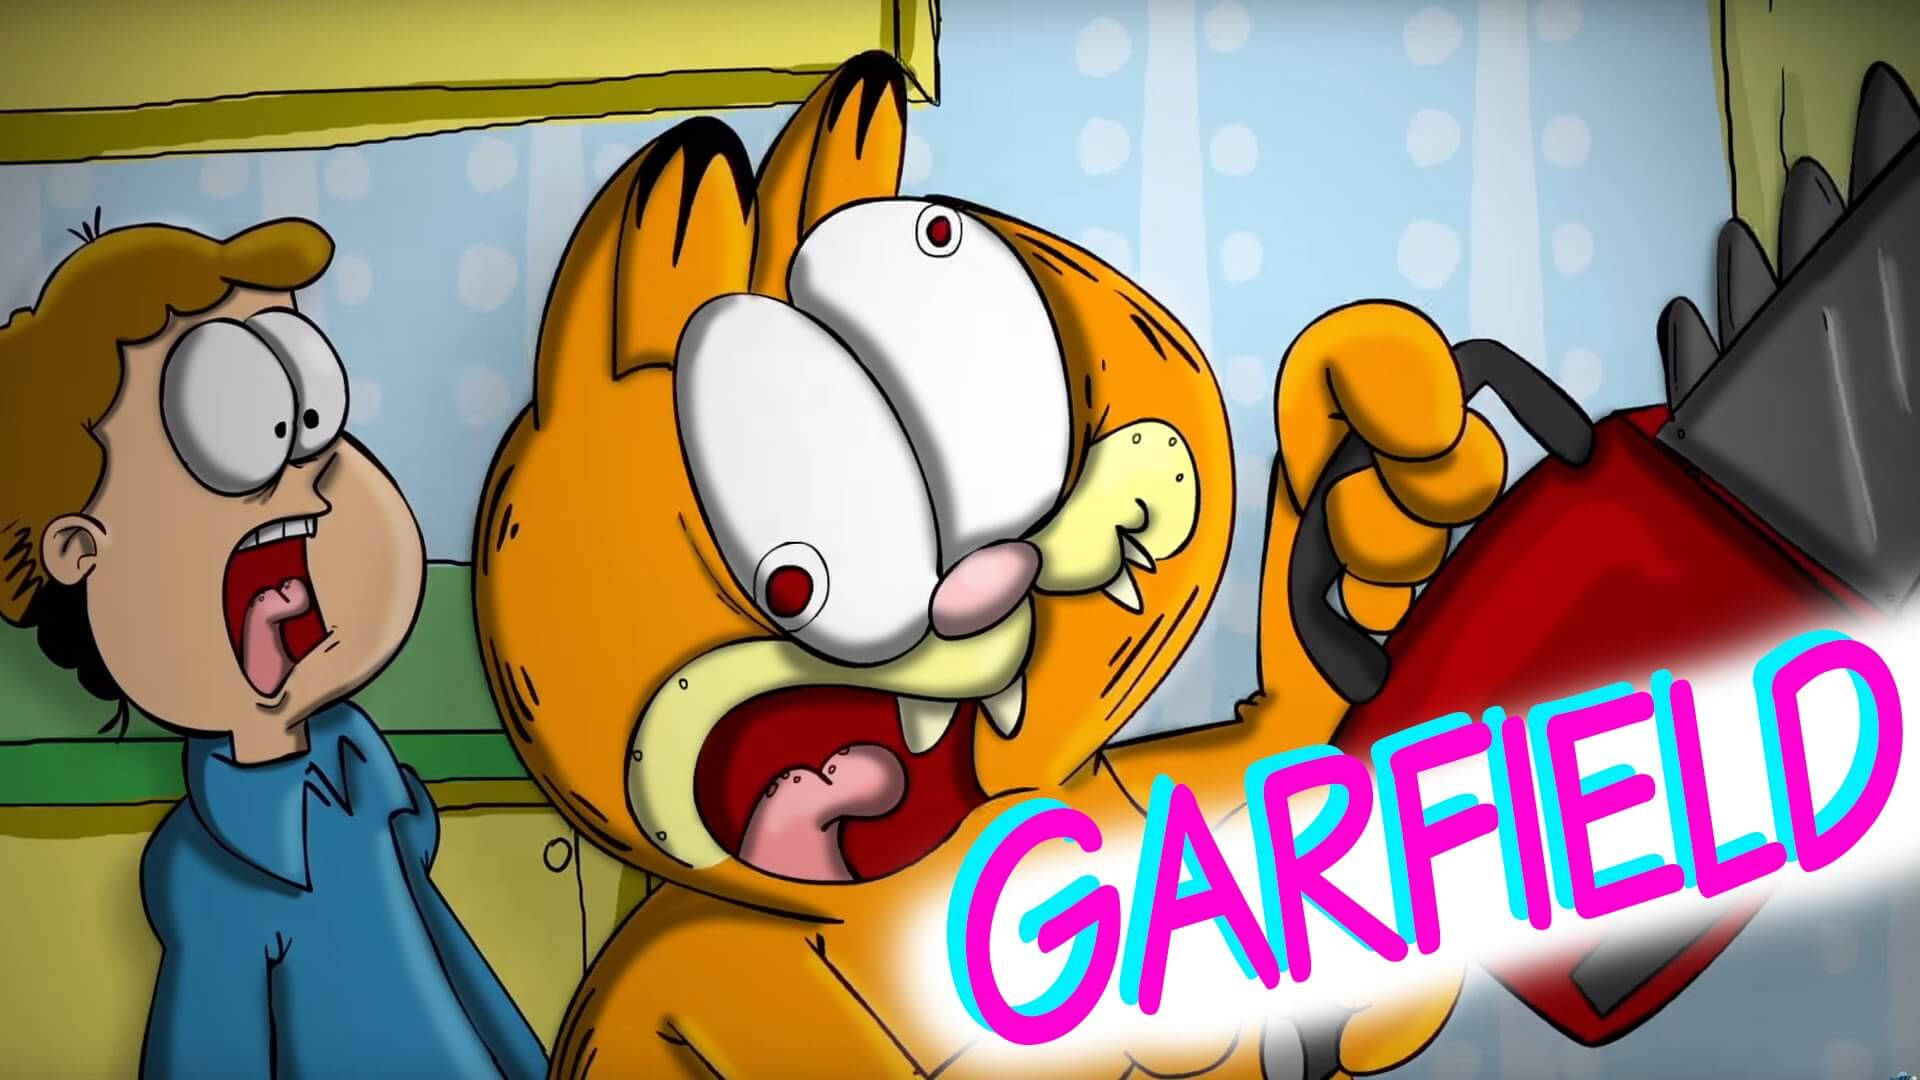 Jon And Garfield With Chainsaw Background